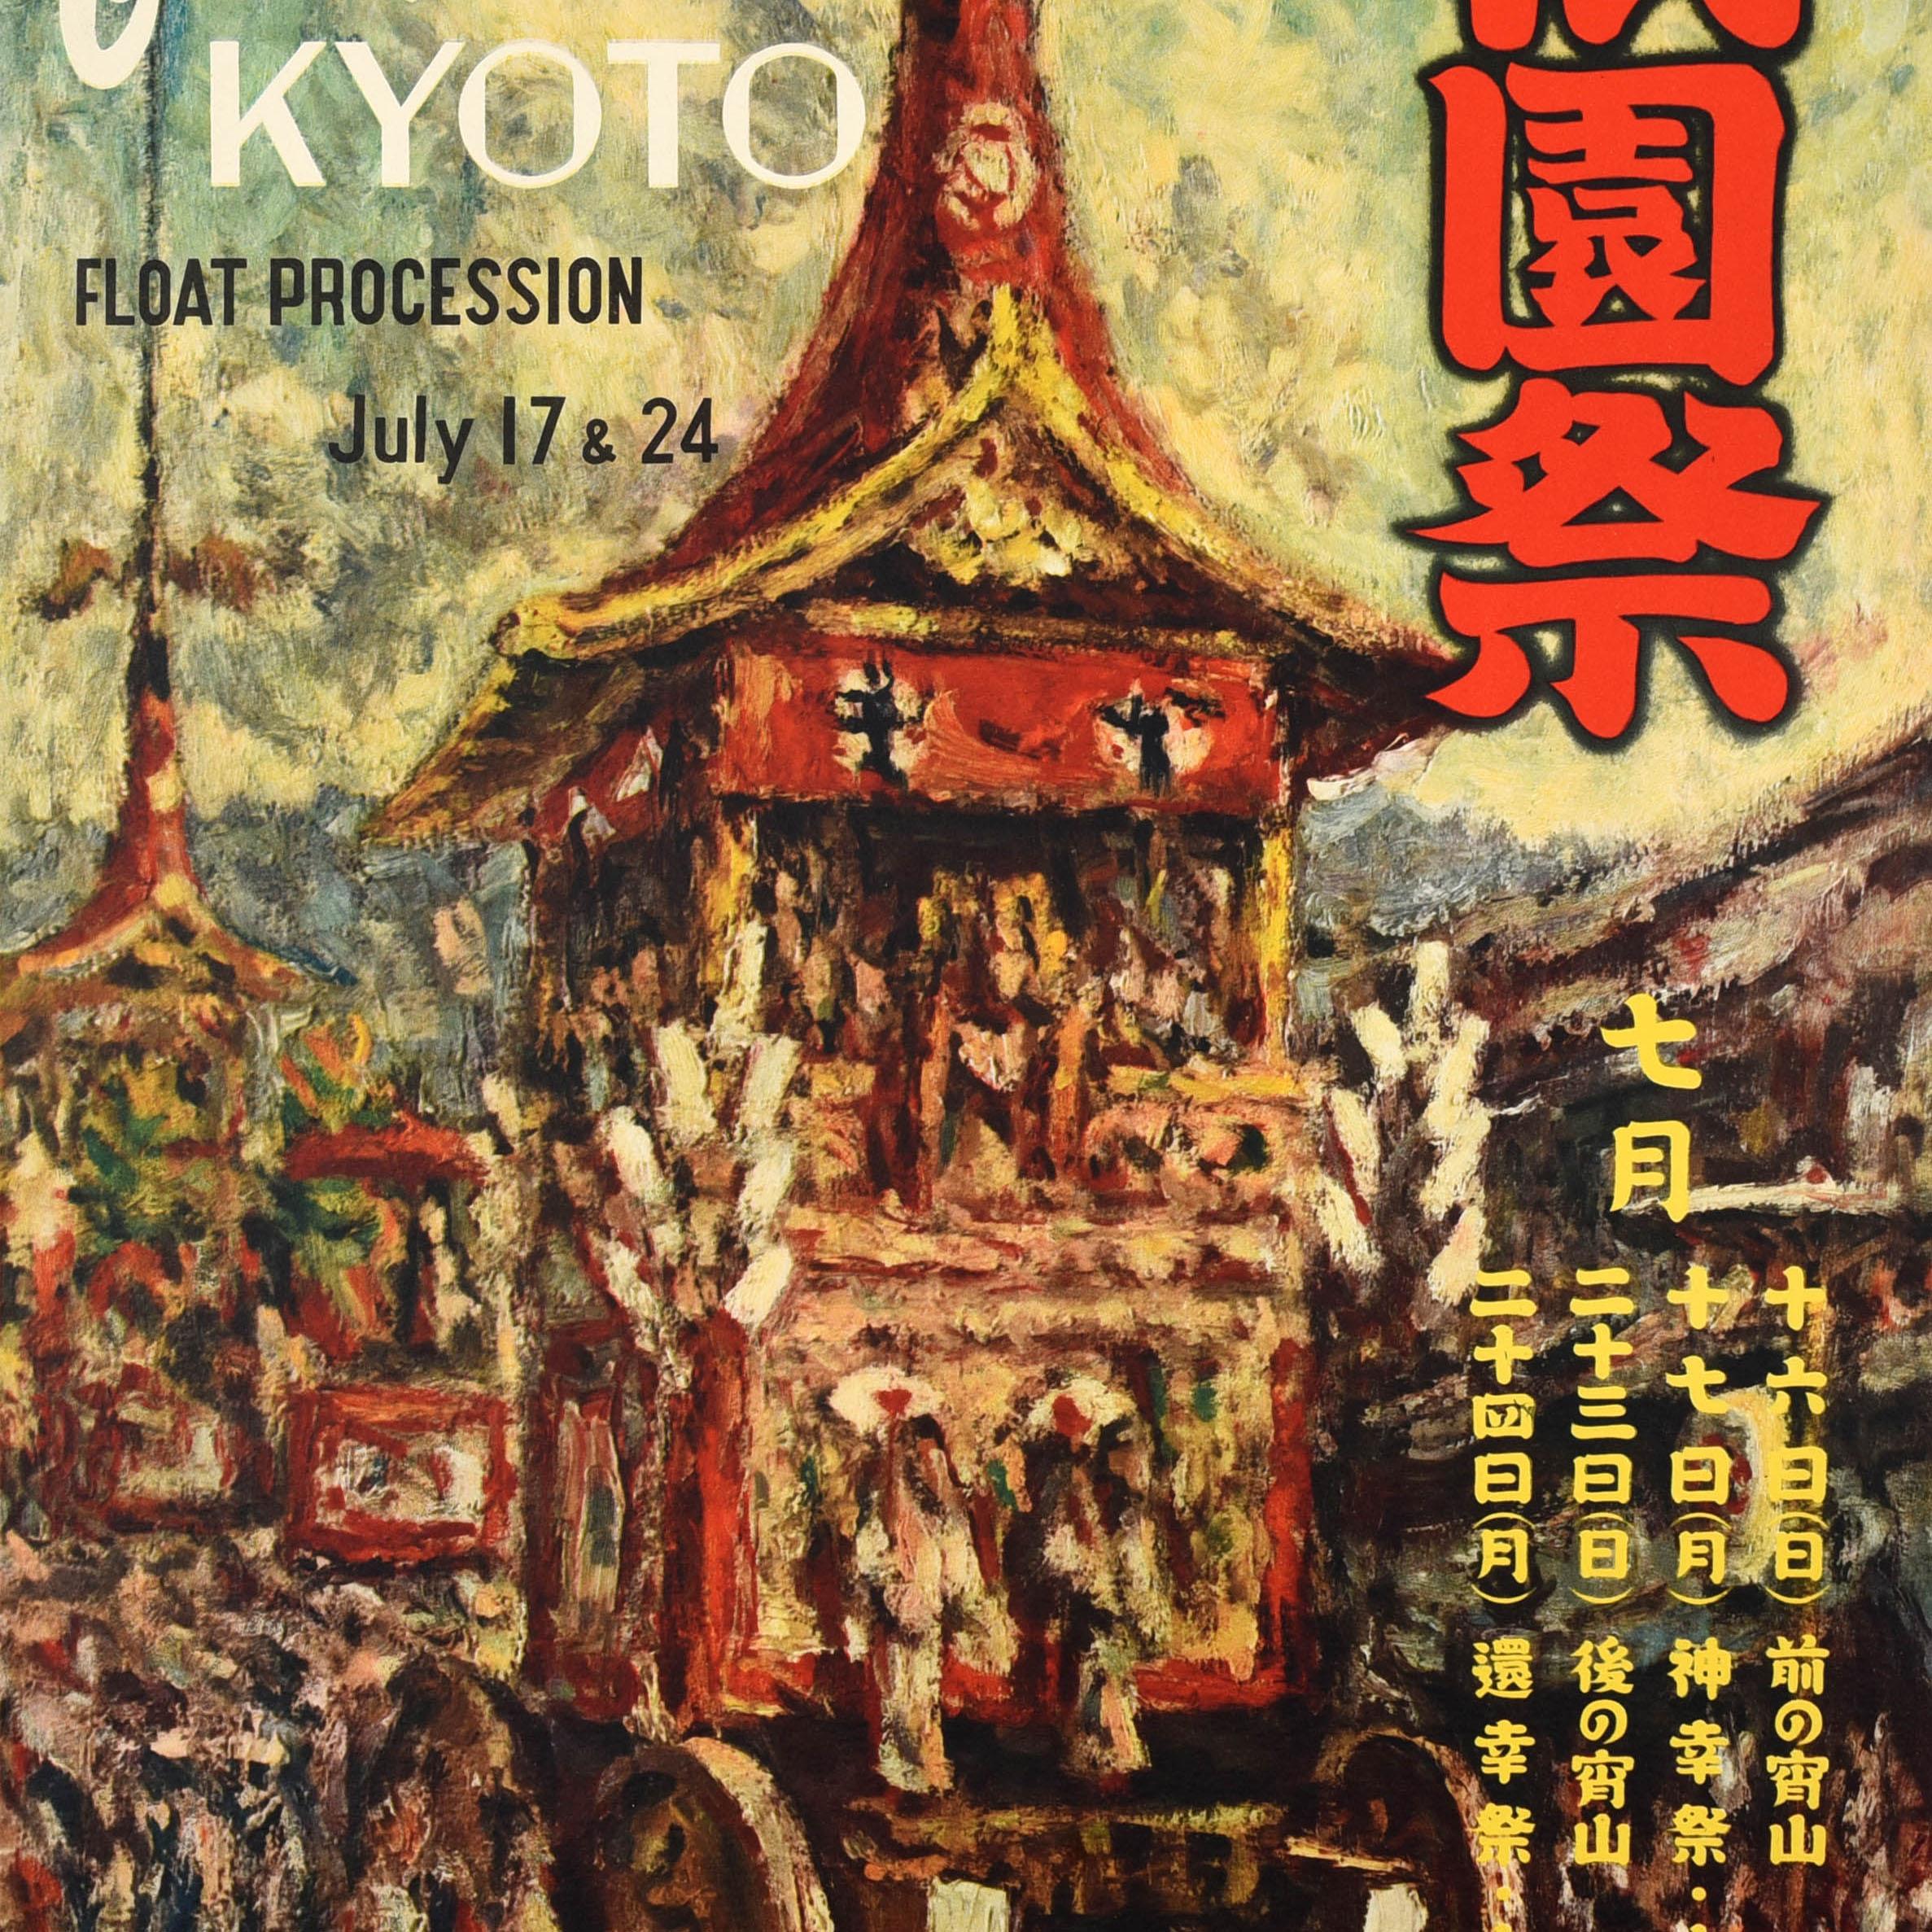 Original Vintage Asia Travel Poster Gion Festival Kyoto Float Procession Japan In Good Condition For Sale In London, GB